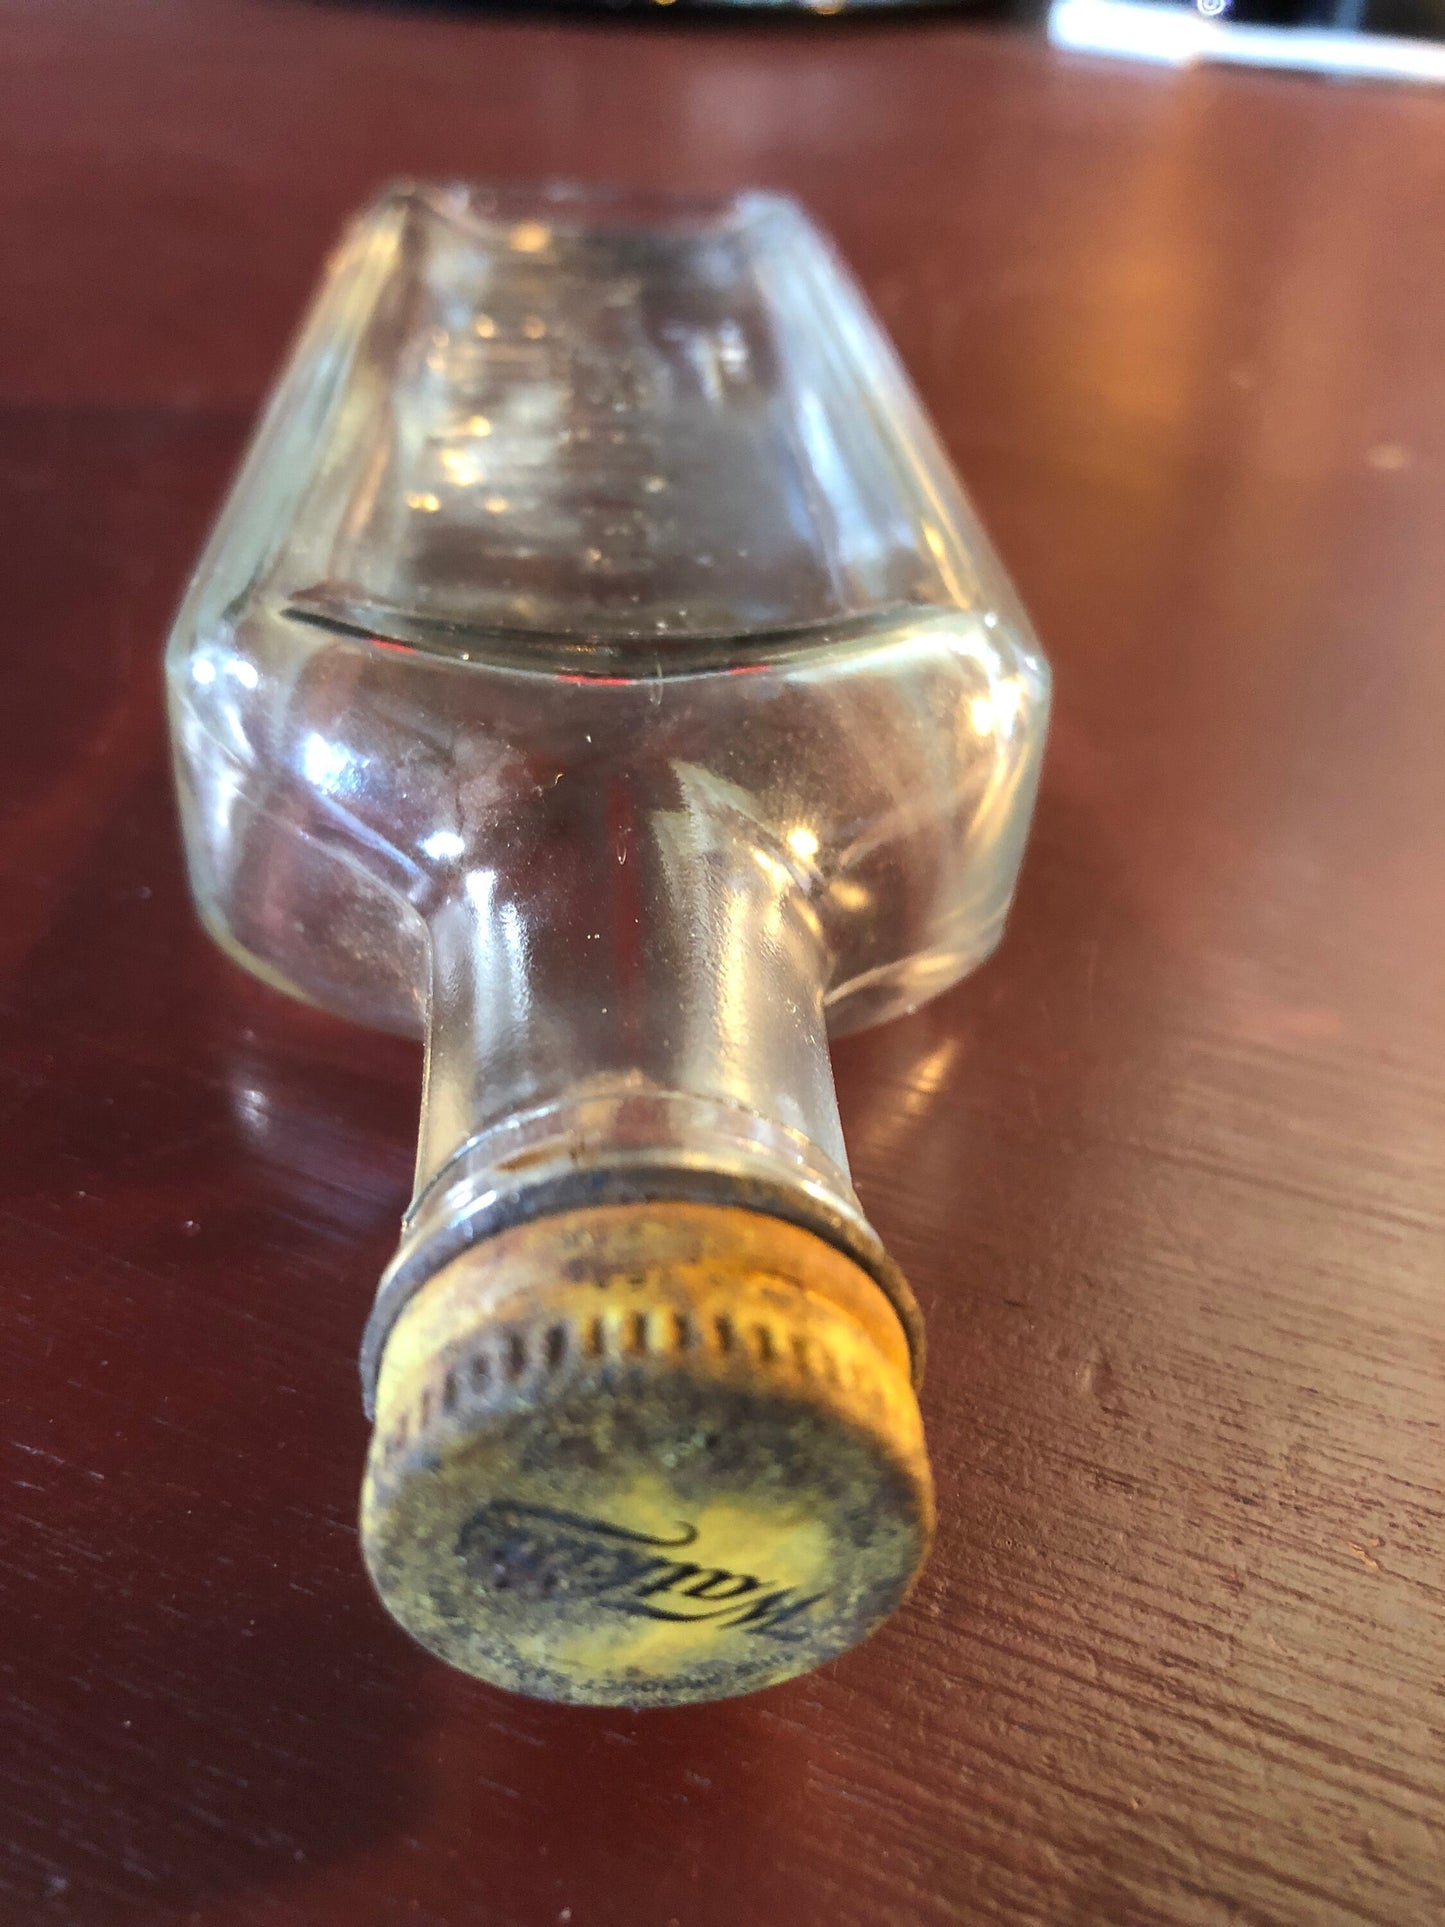 The J.R. Watkins, Vintage Collectible Clear Rectangular, Liniment Bottle with matching metal screw cap imprinted with Watkins